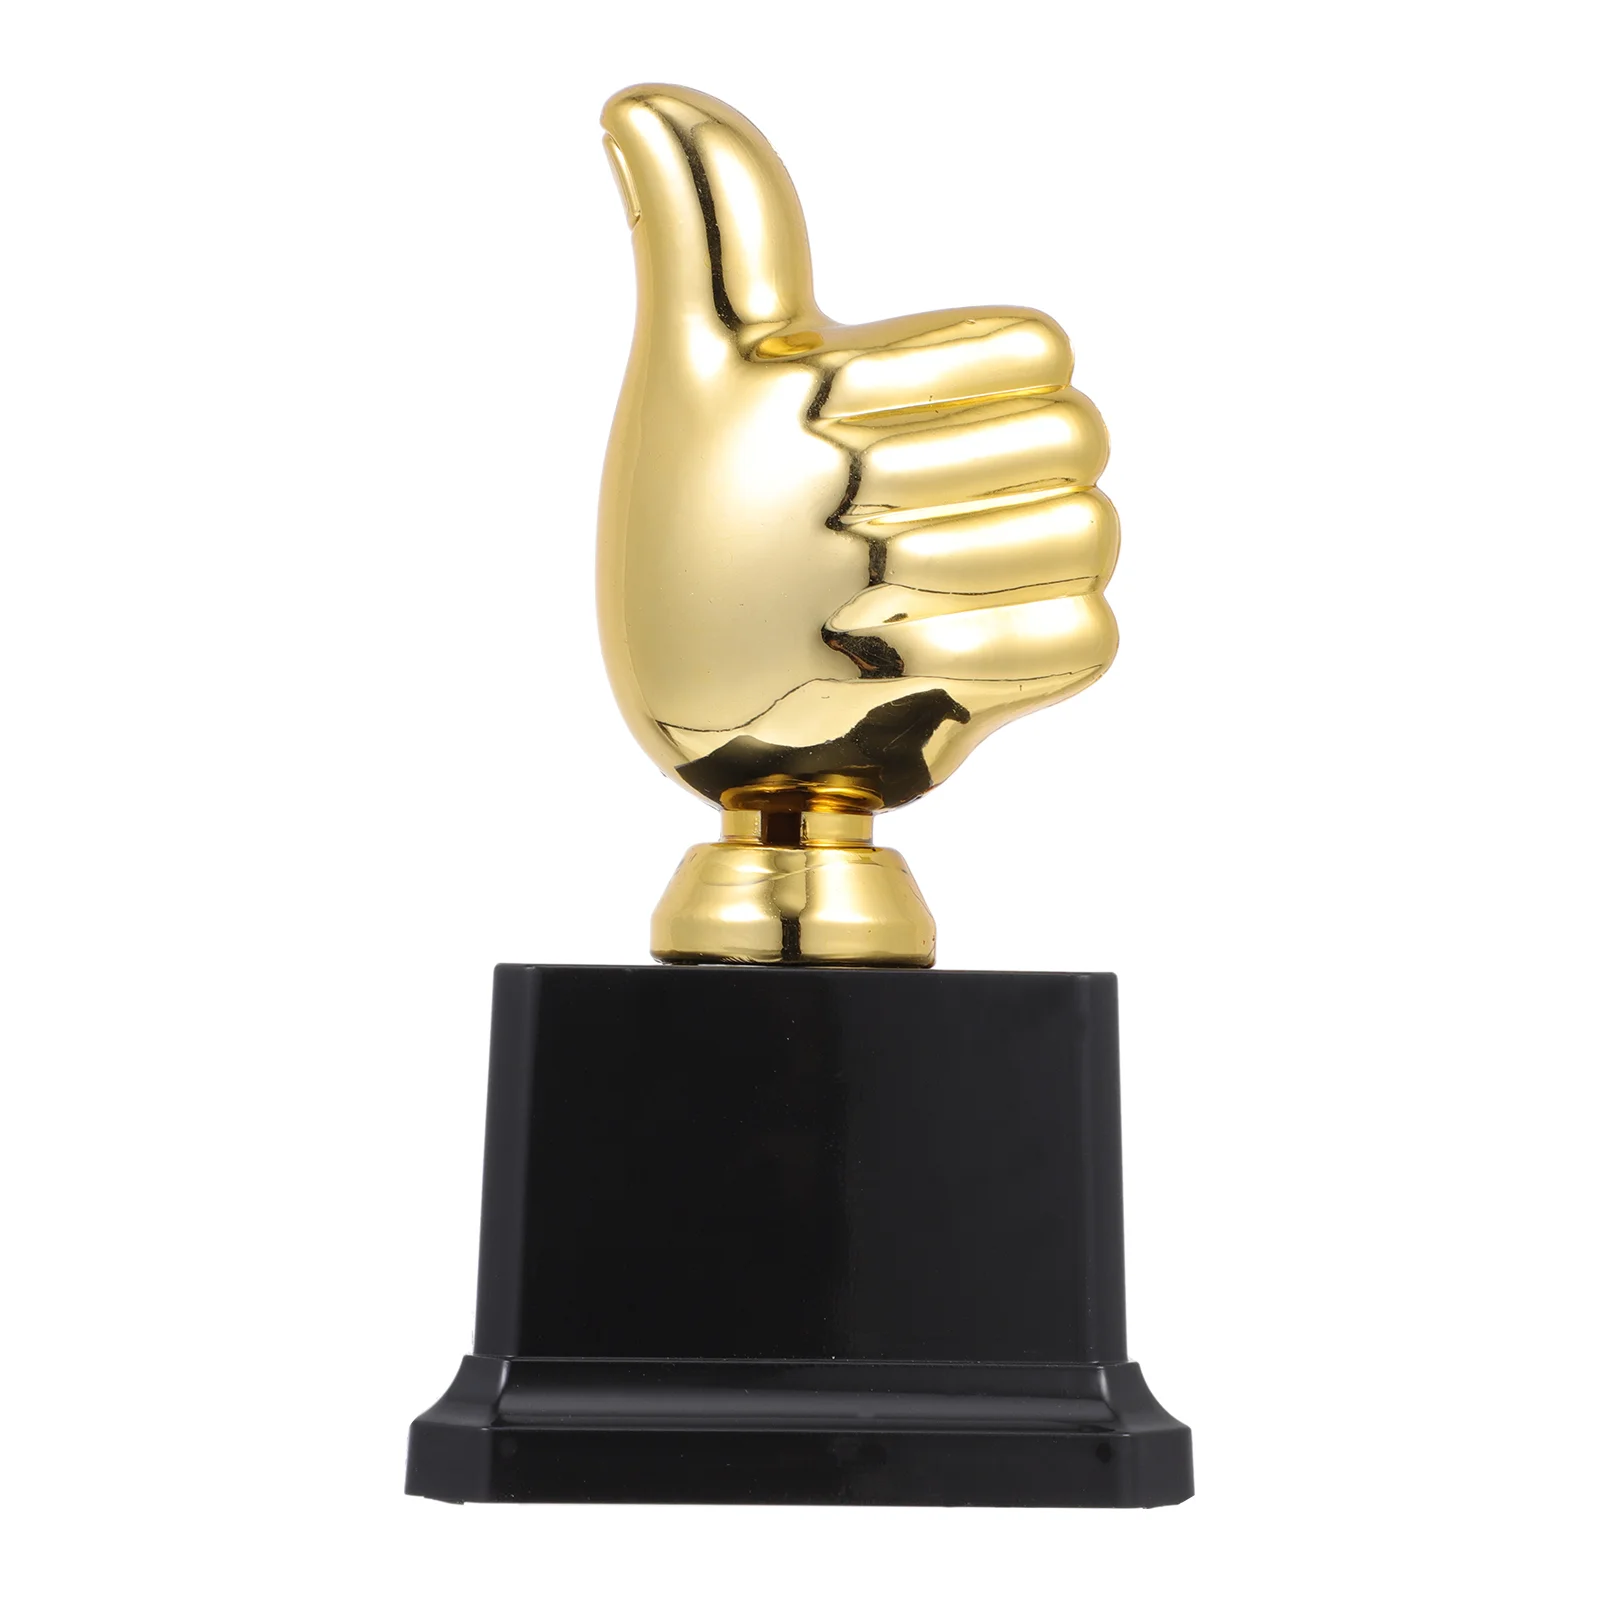 

Trophy Trophies Award Gold Golden Cup Football Awards Thumb Kids Hand Prizes Competition Decorations Figurine Basketball Game